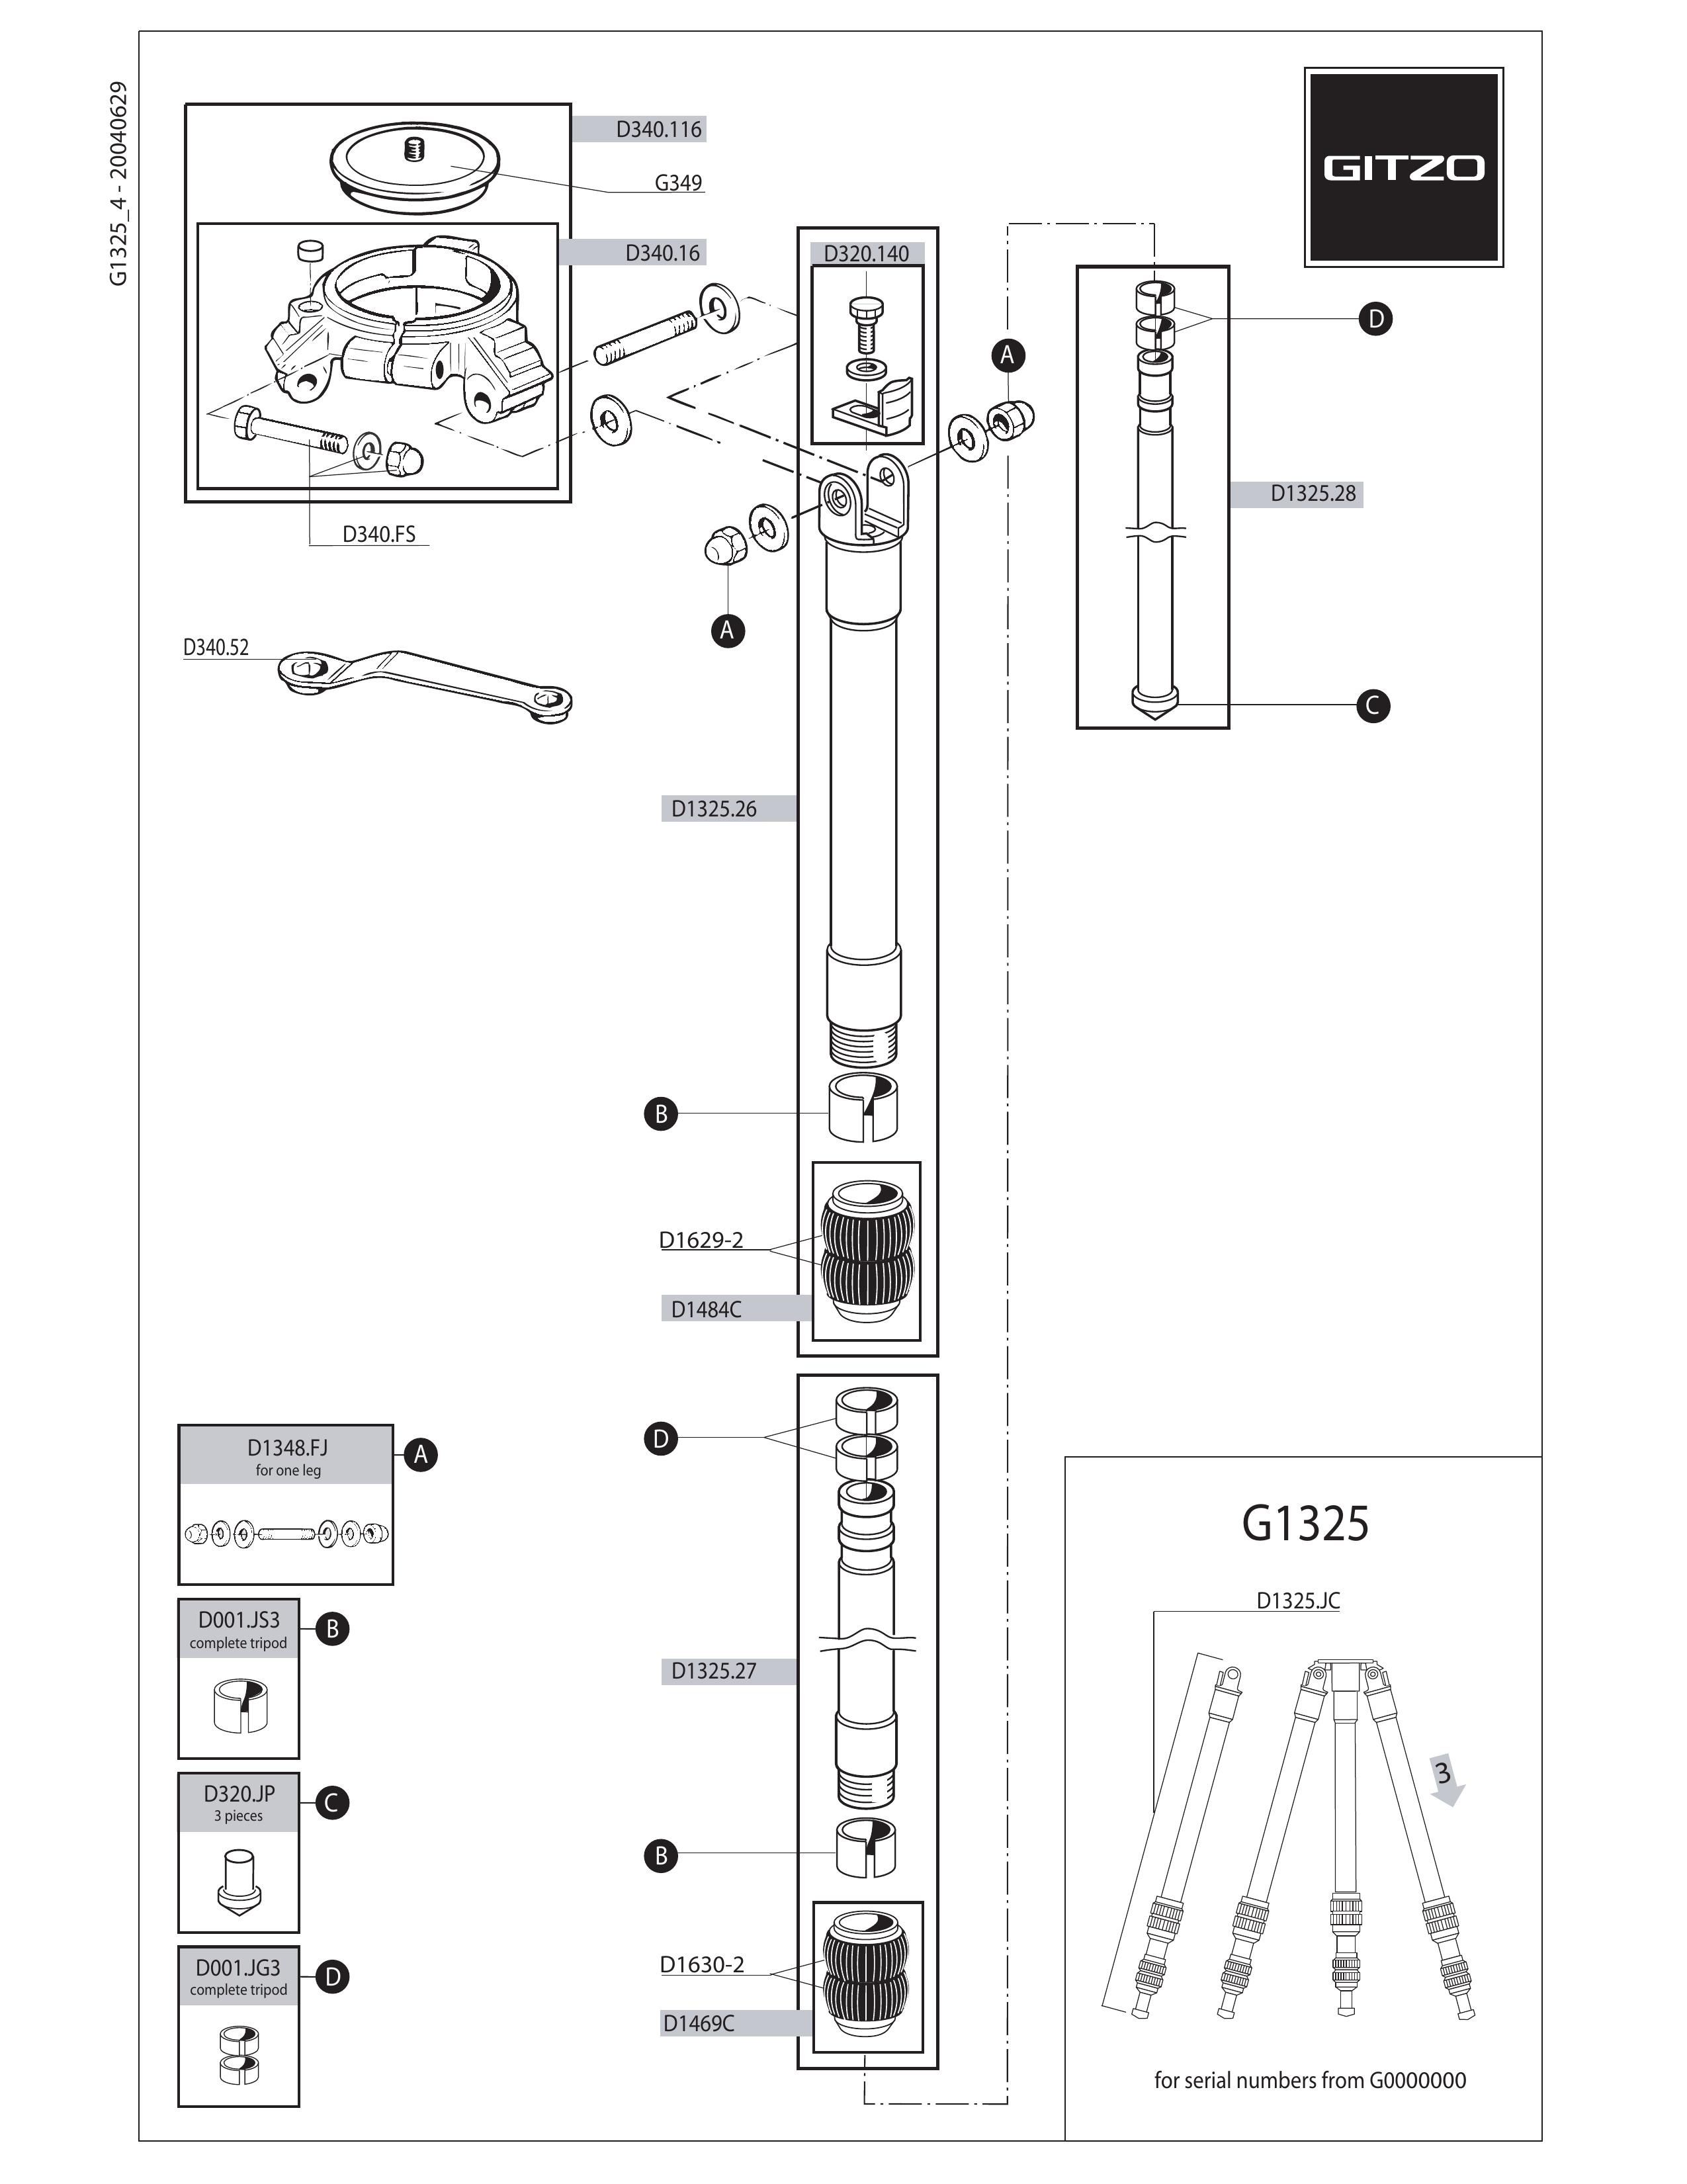 Gitzo G1325 Camcorder Accessories User Manual (Page 1)